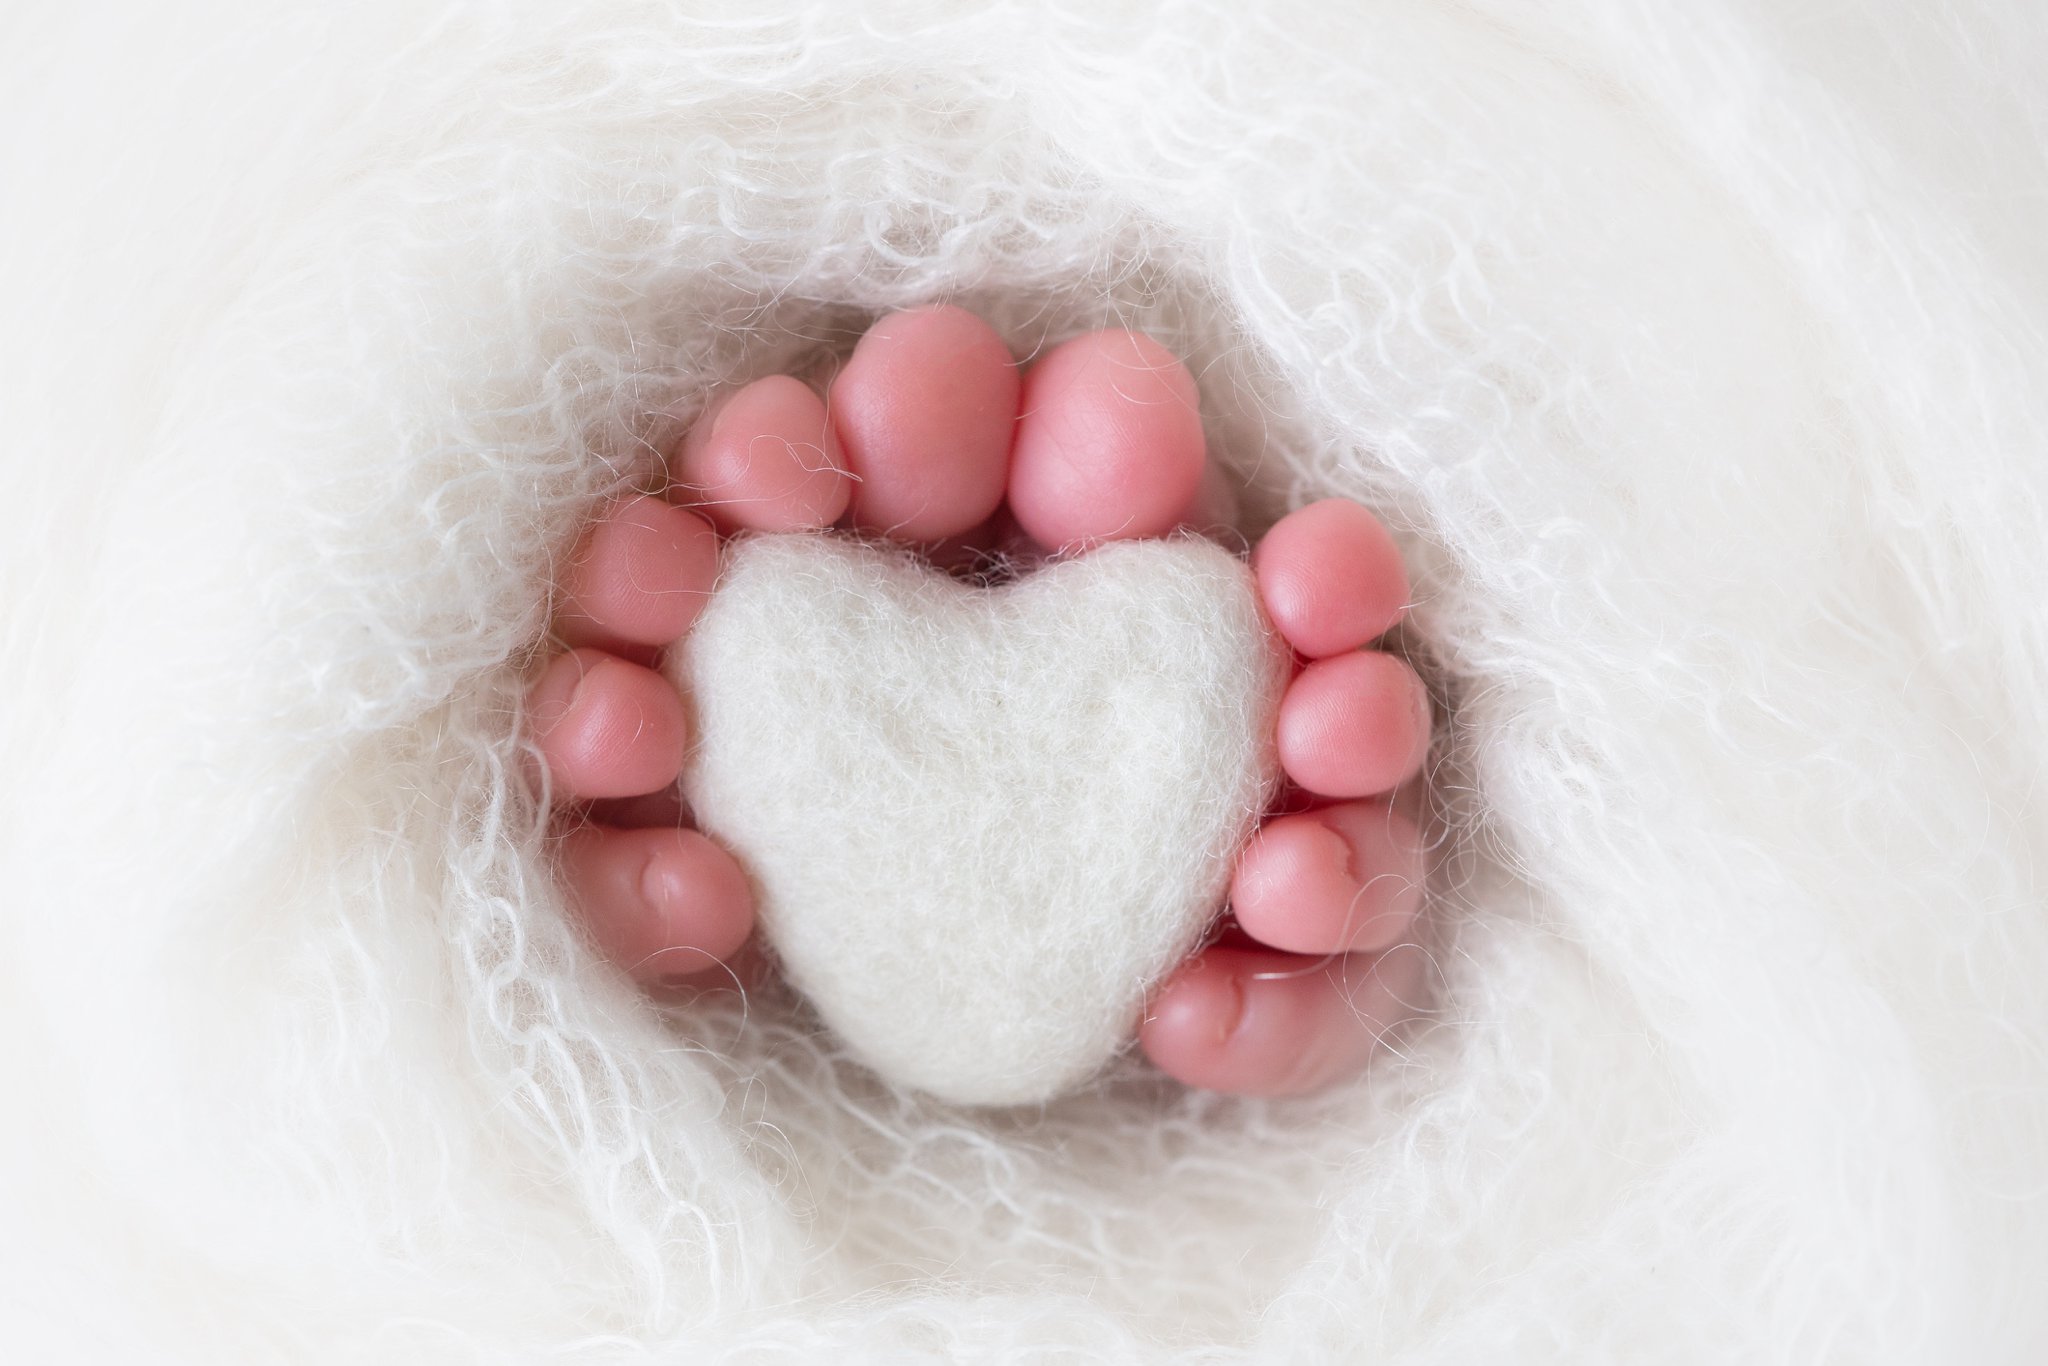 Photos of newborn baby boys feet wrapped around a little felted heart